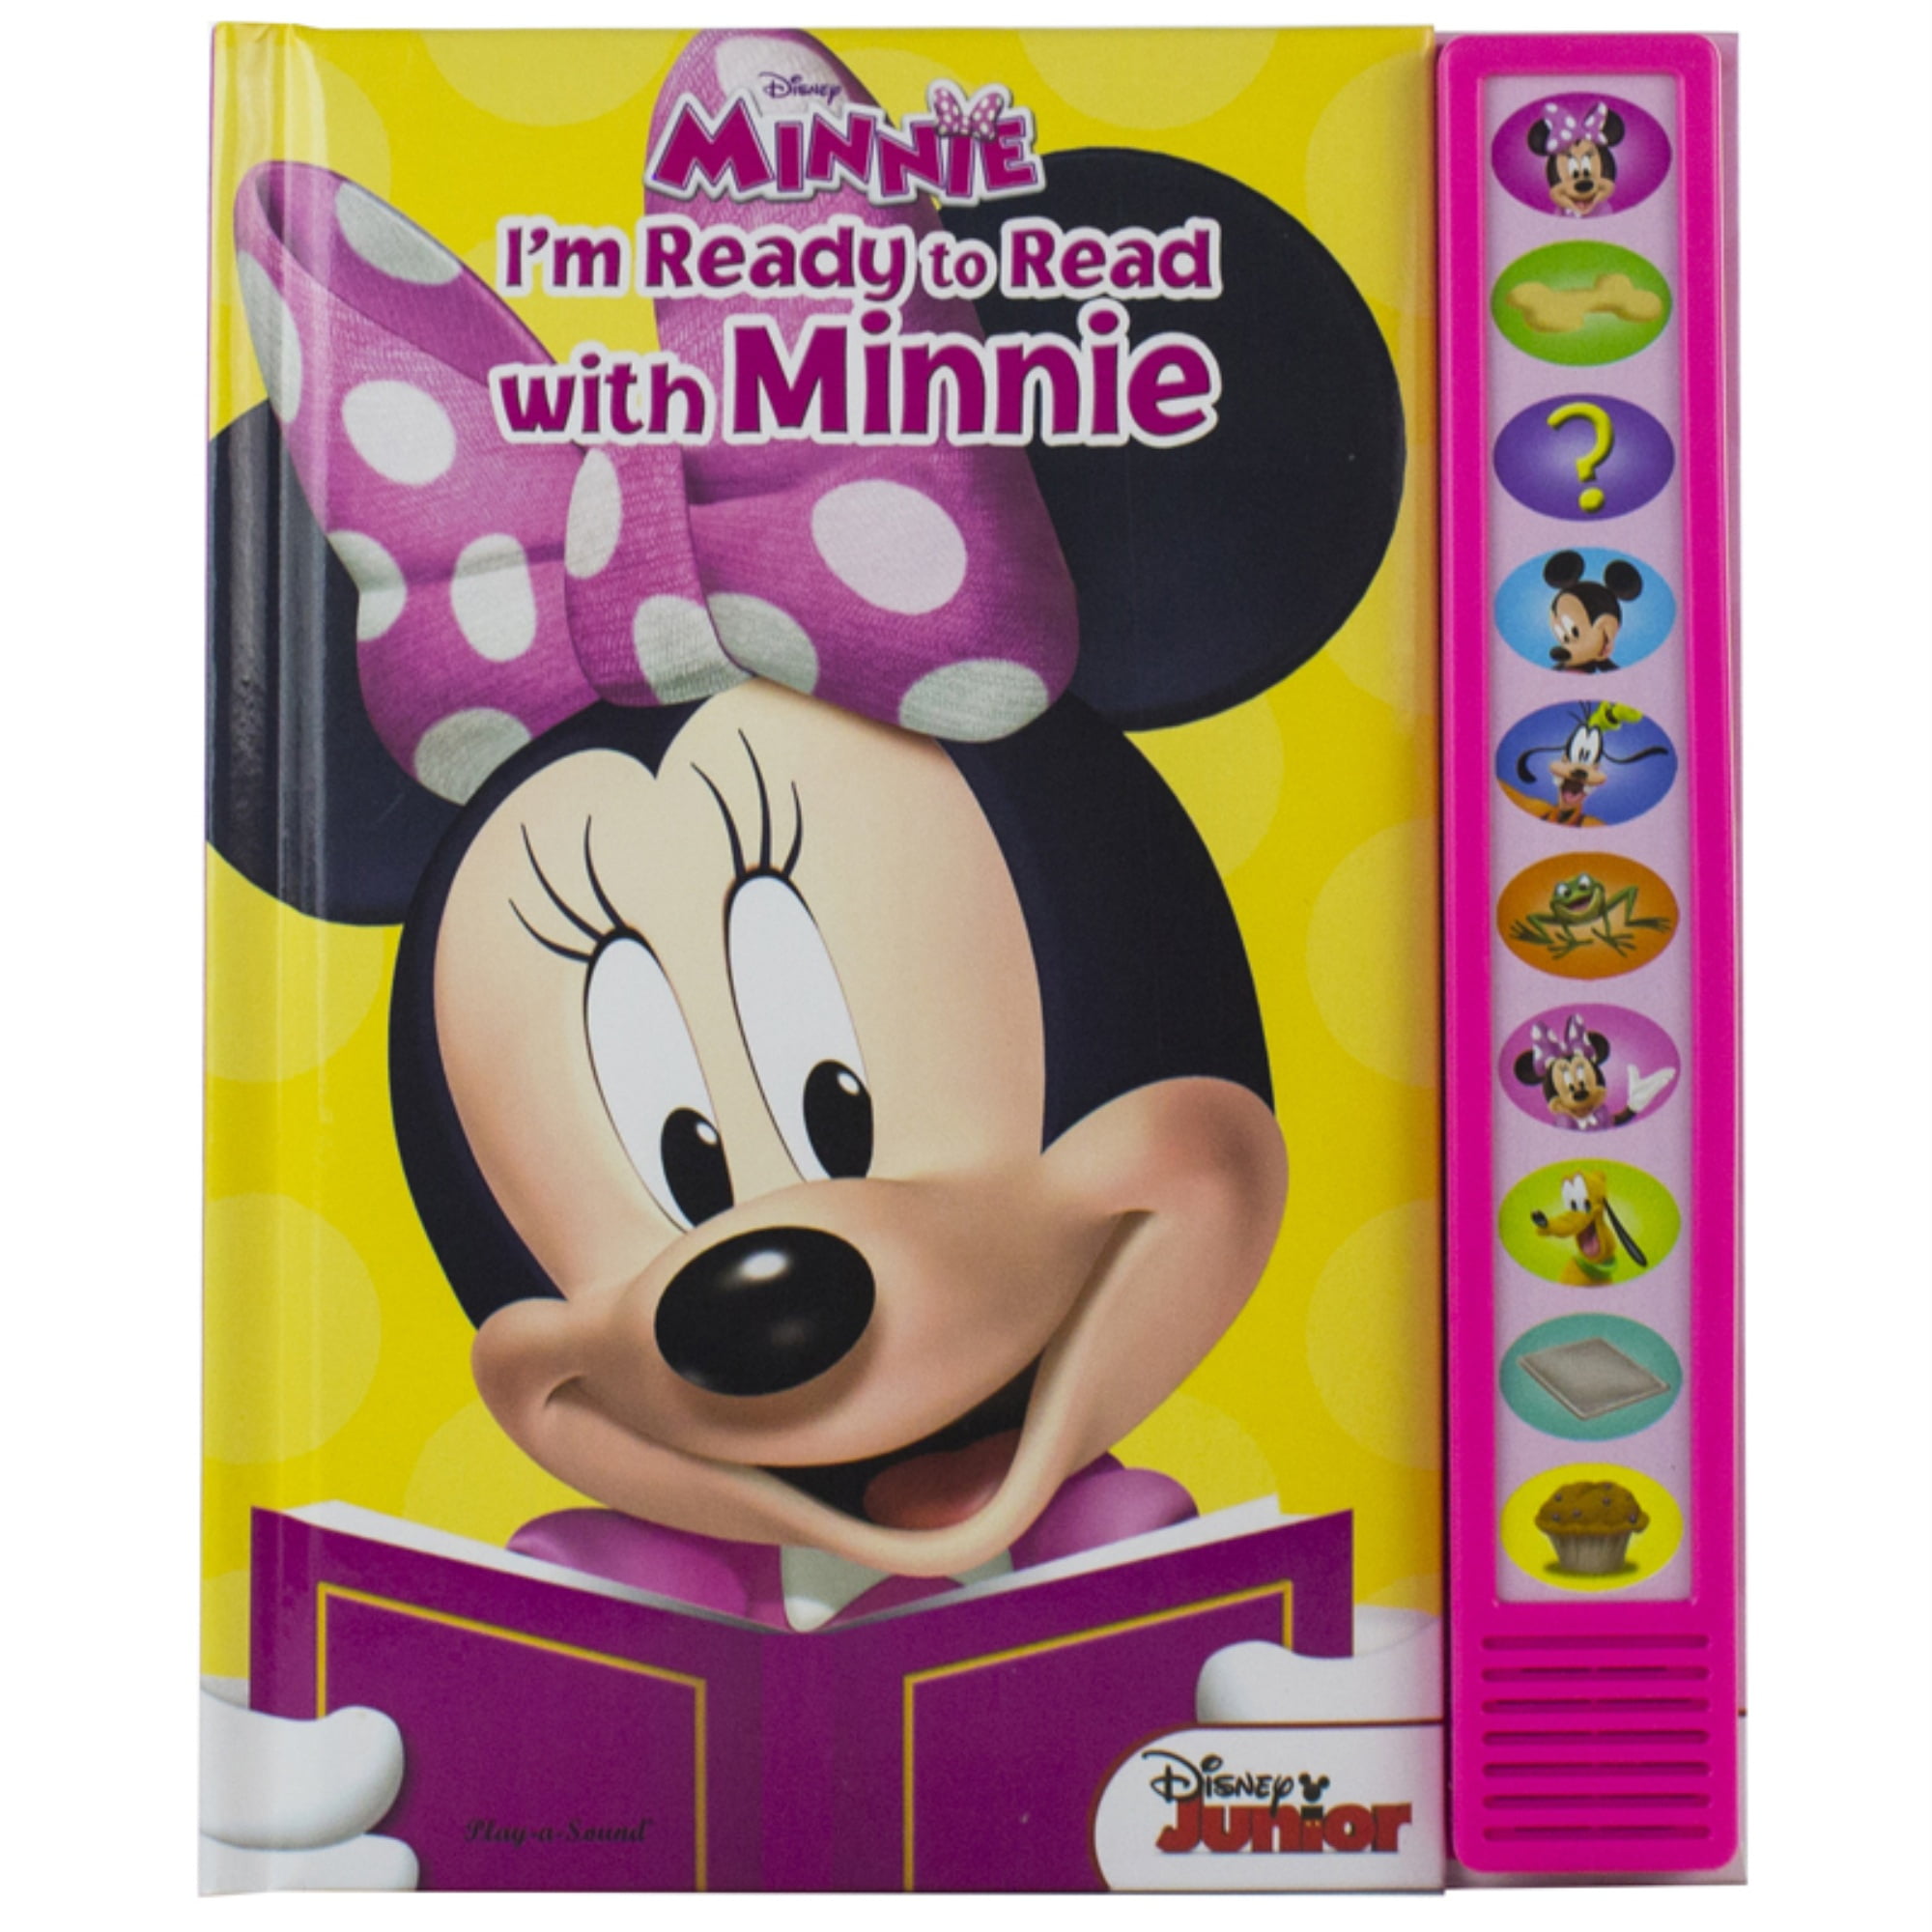 DISNEY MINNIE MOUSE WIPE-CLEAN ACTIVITY BOARD DRY ERASE LEARNING FUN FOR KIDS! 